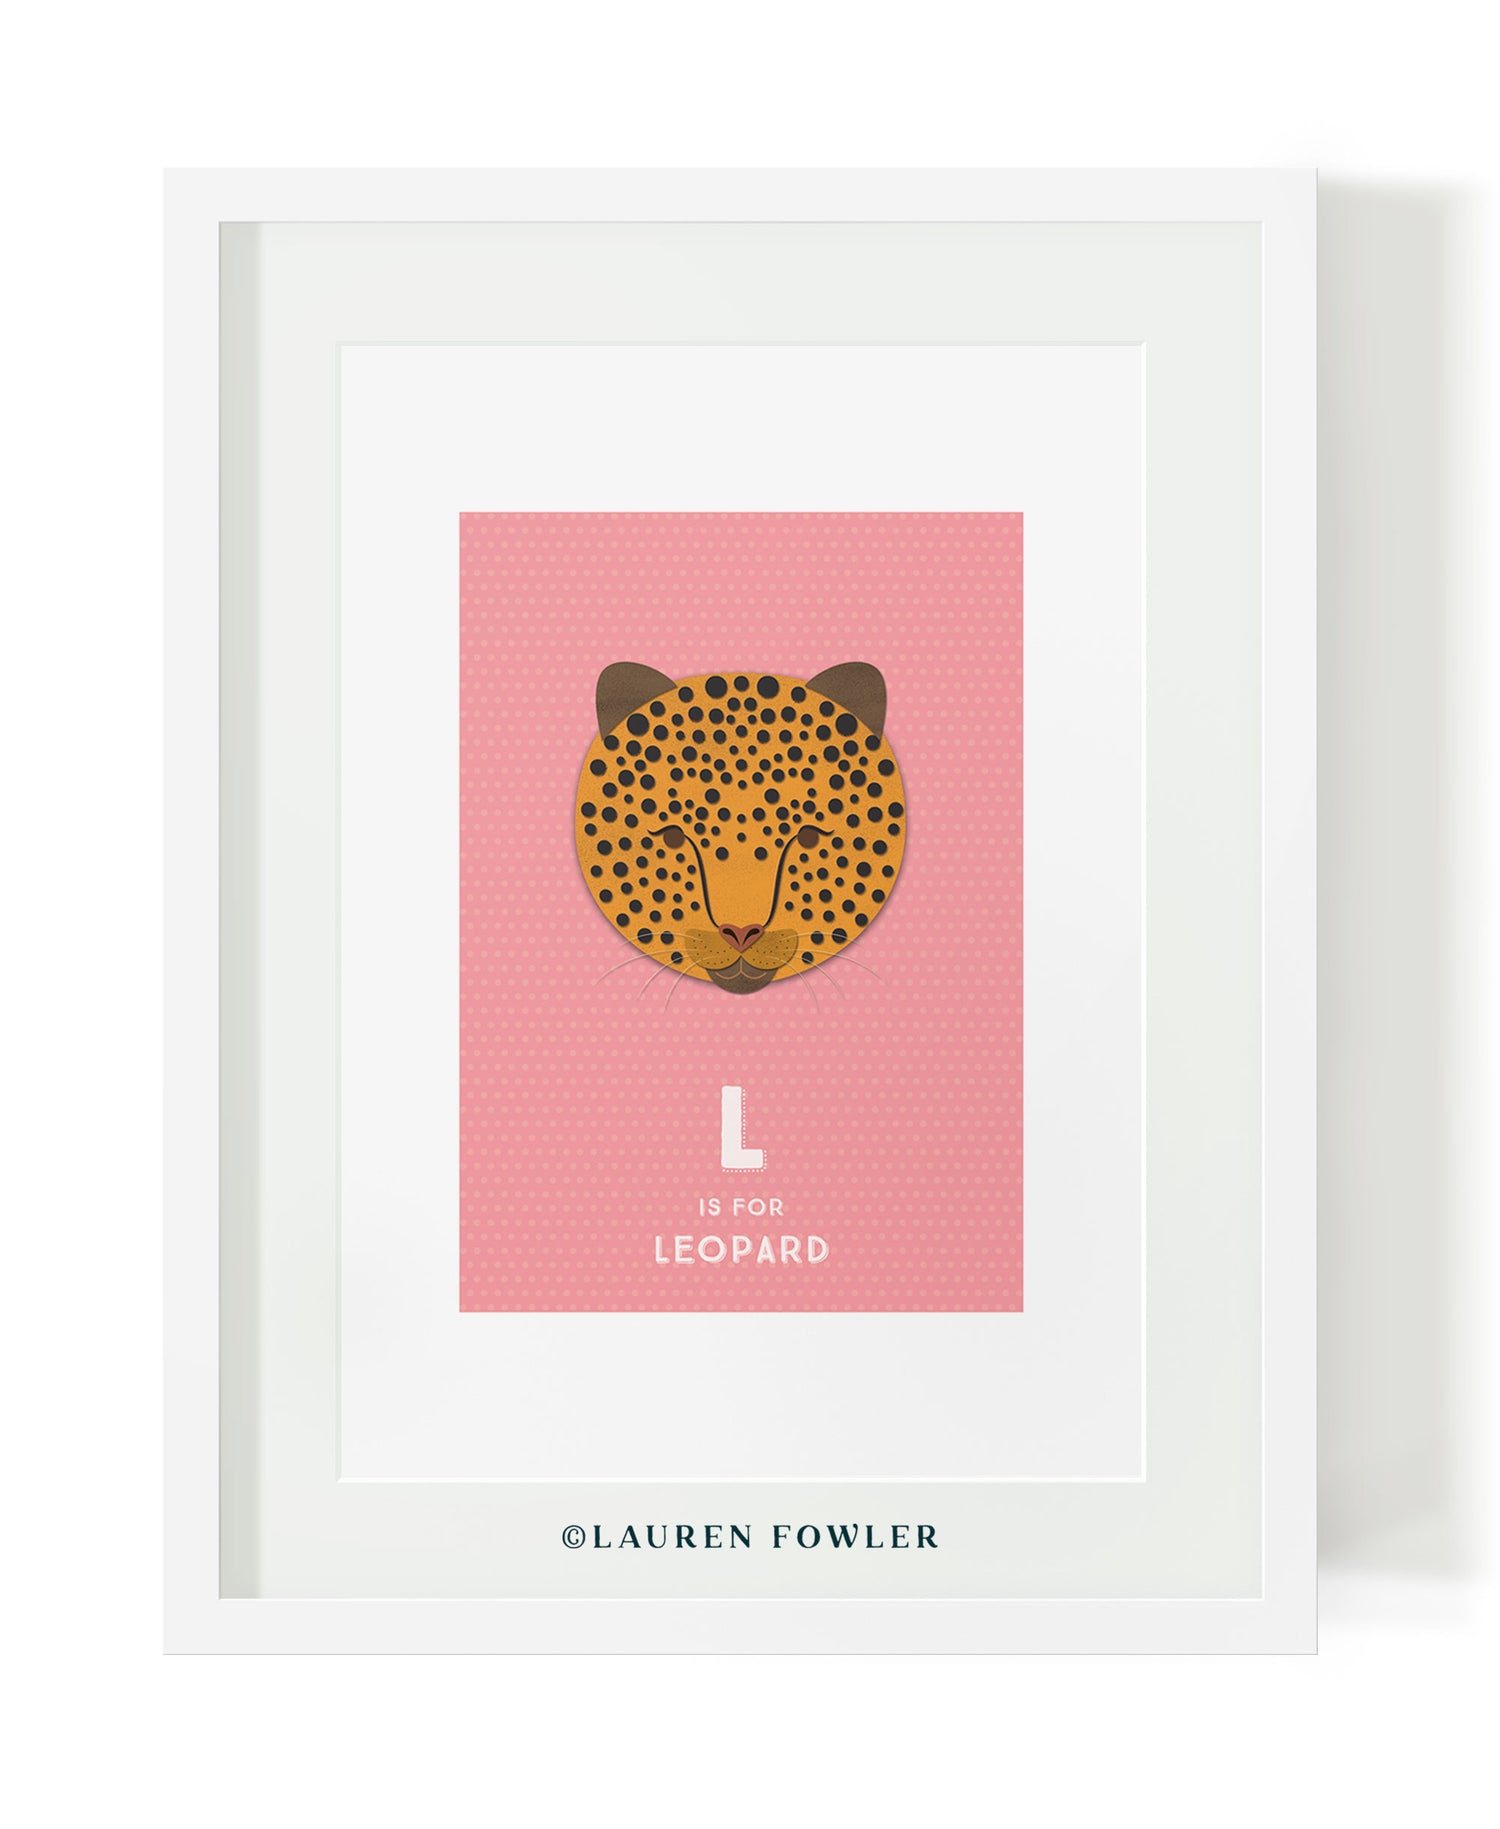 South African Big Five Leopard illustrated artwork by Lauren Fowler